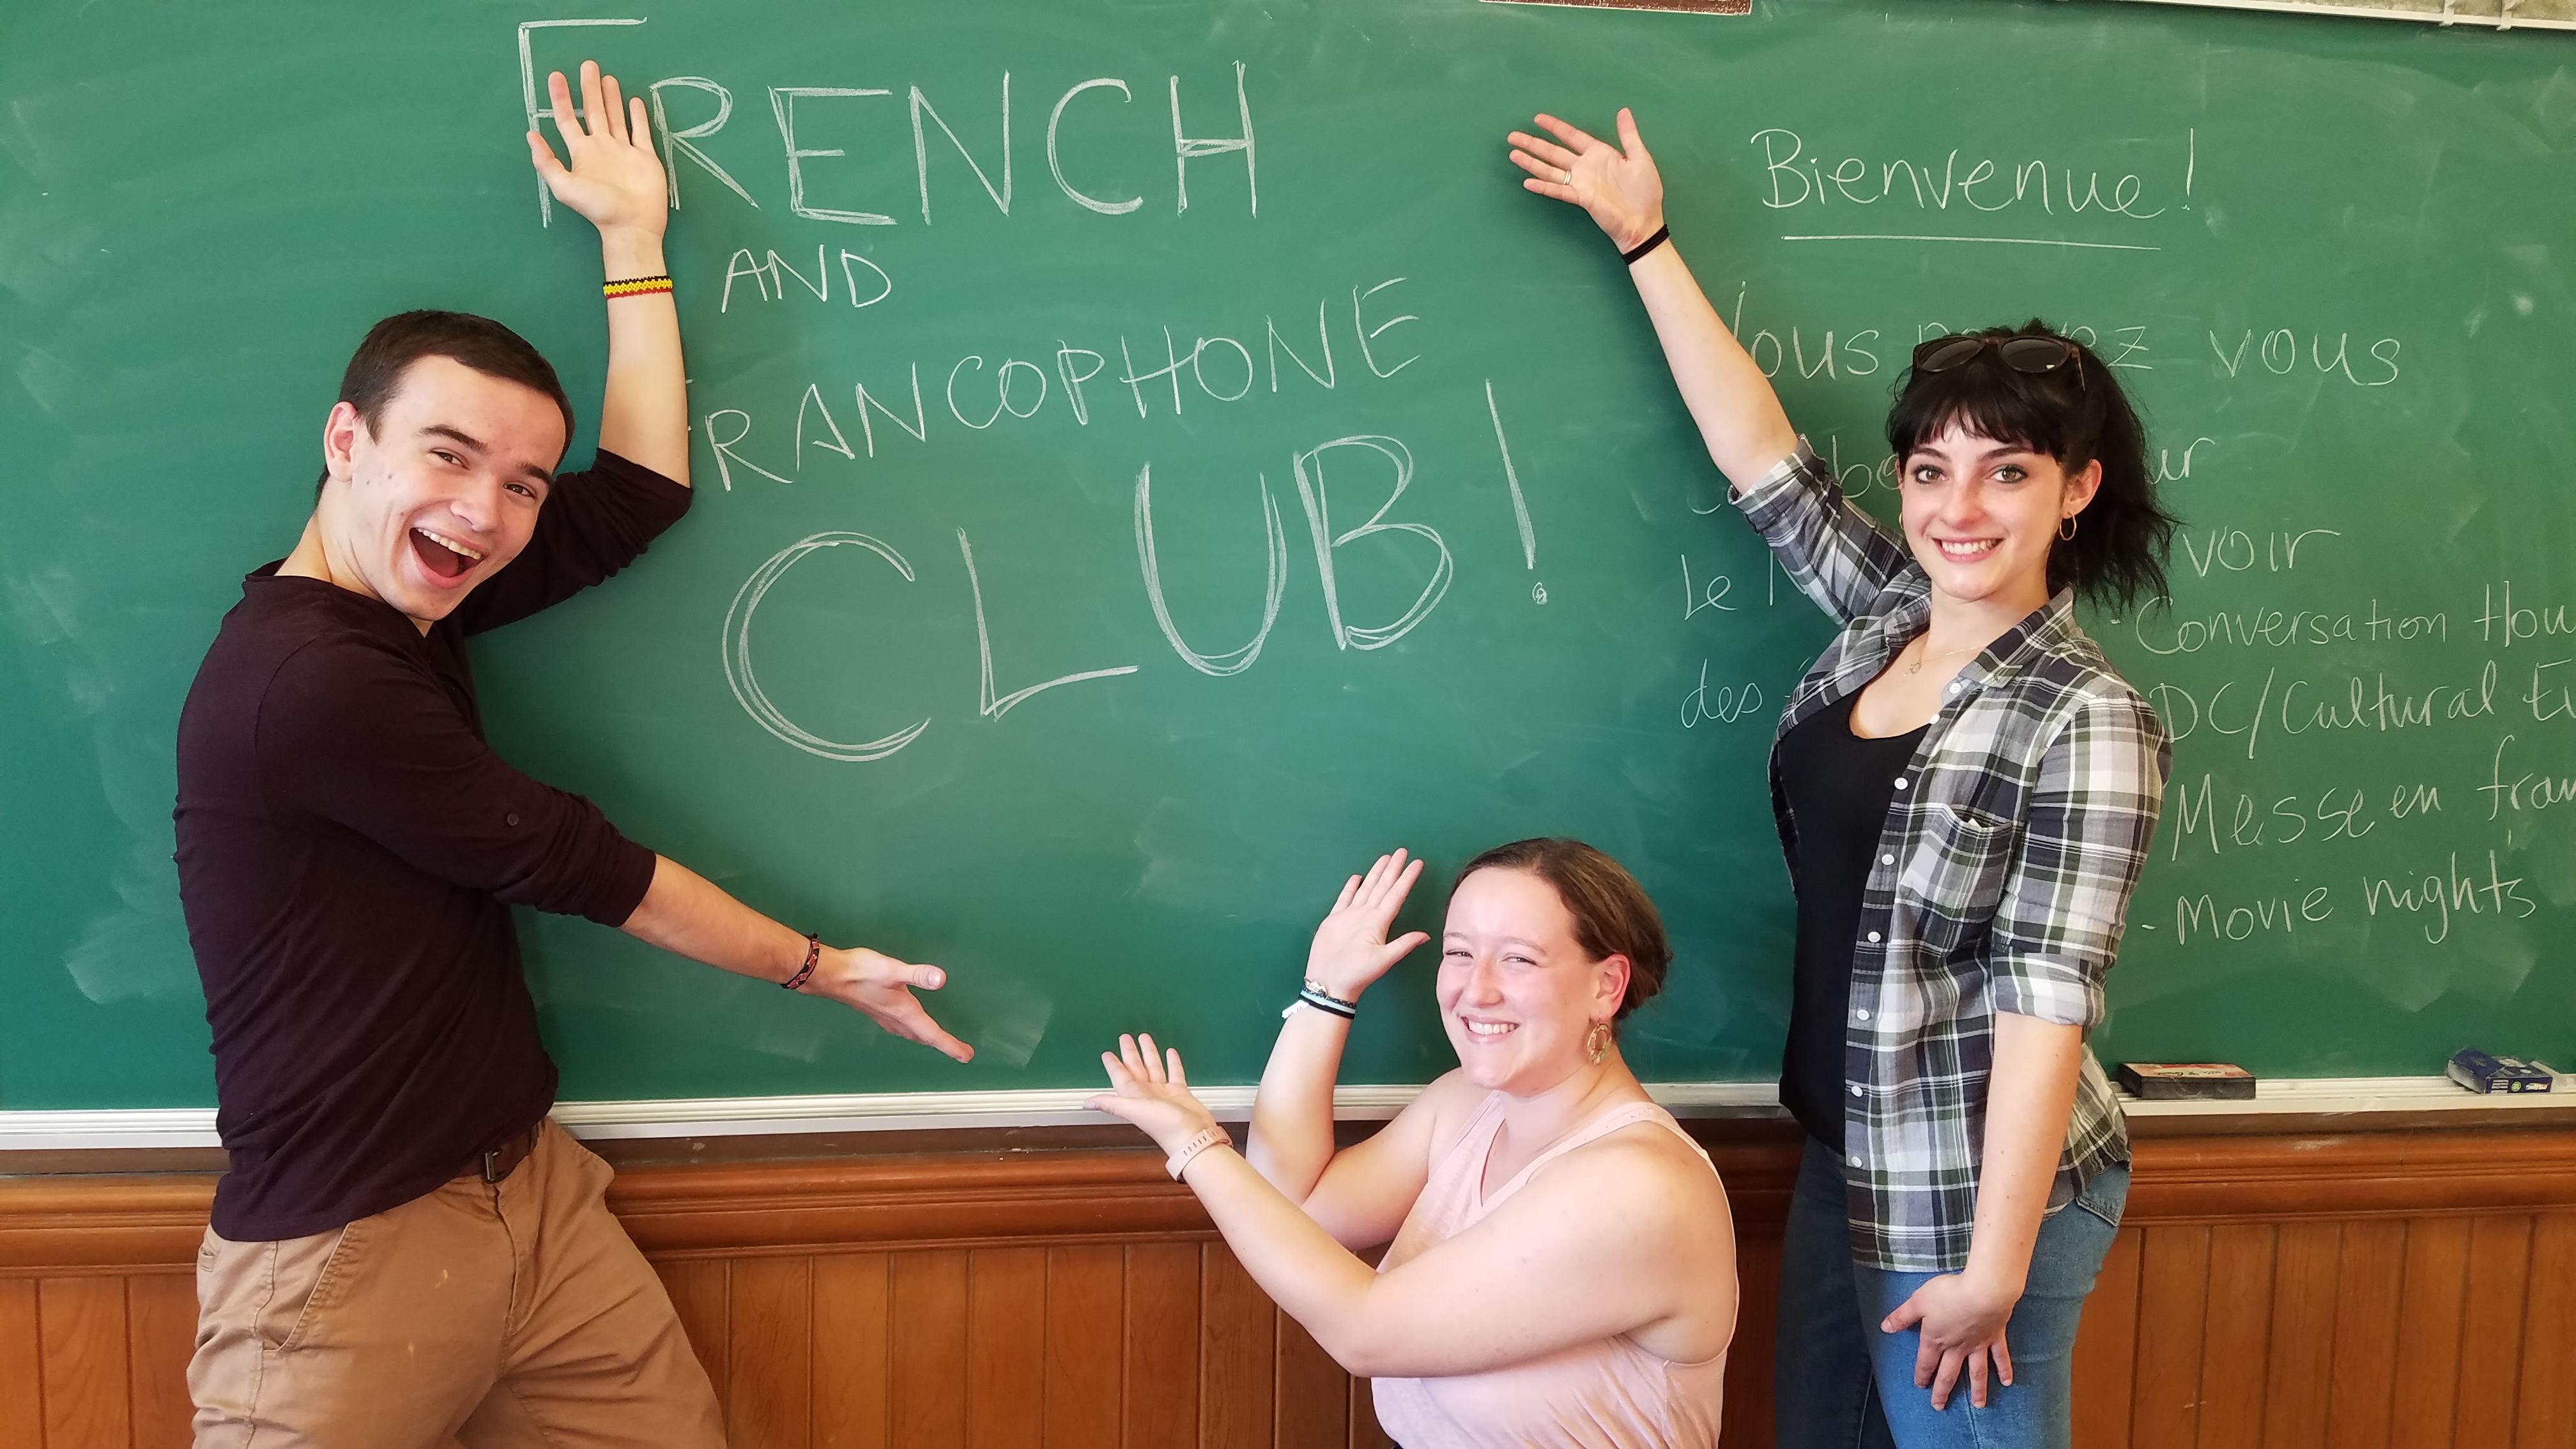 Smiling students pointing at a French Club sign.